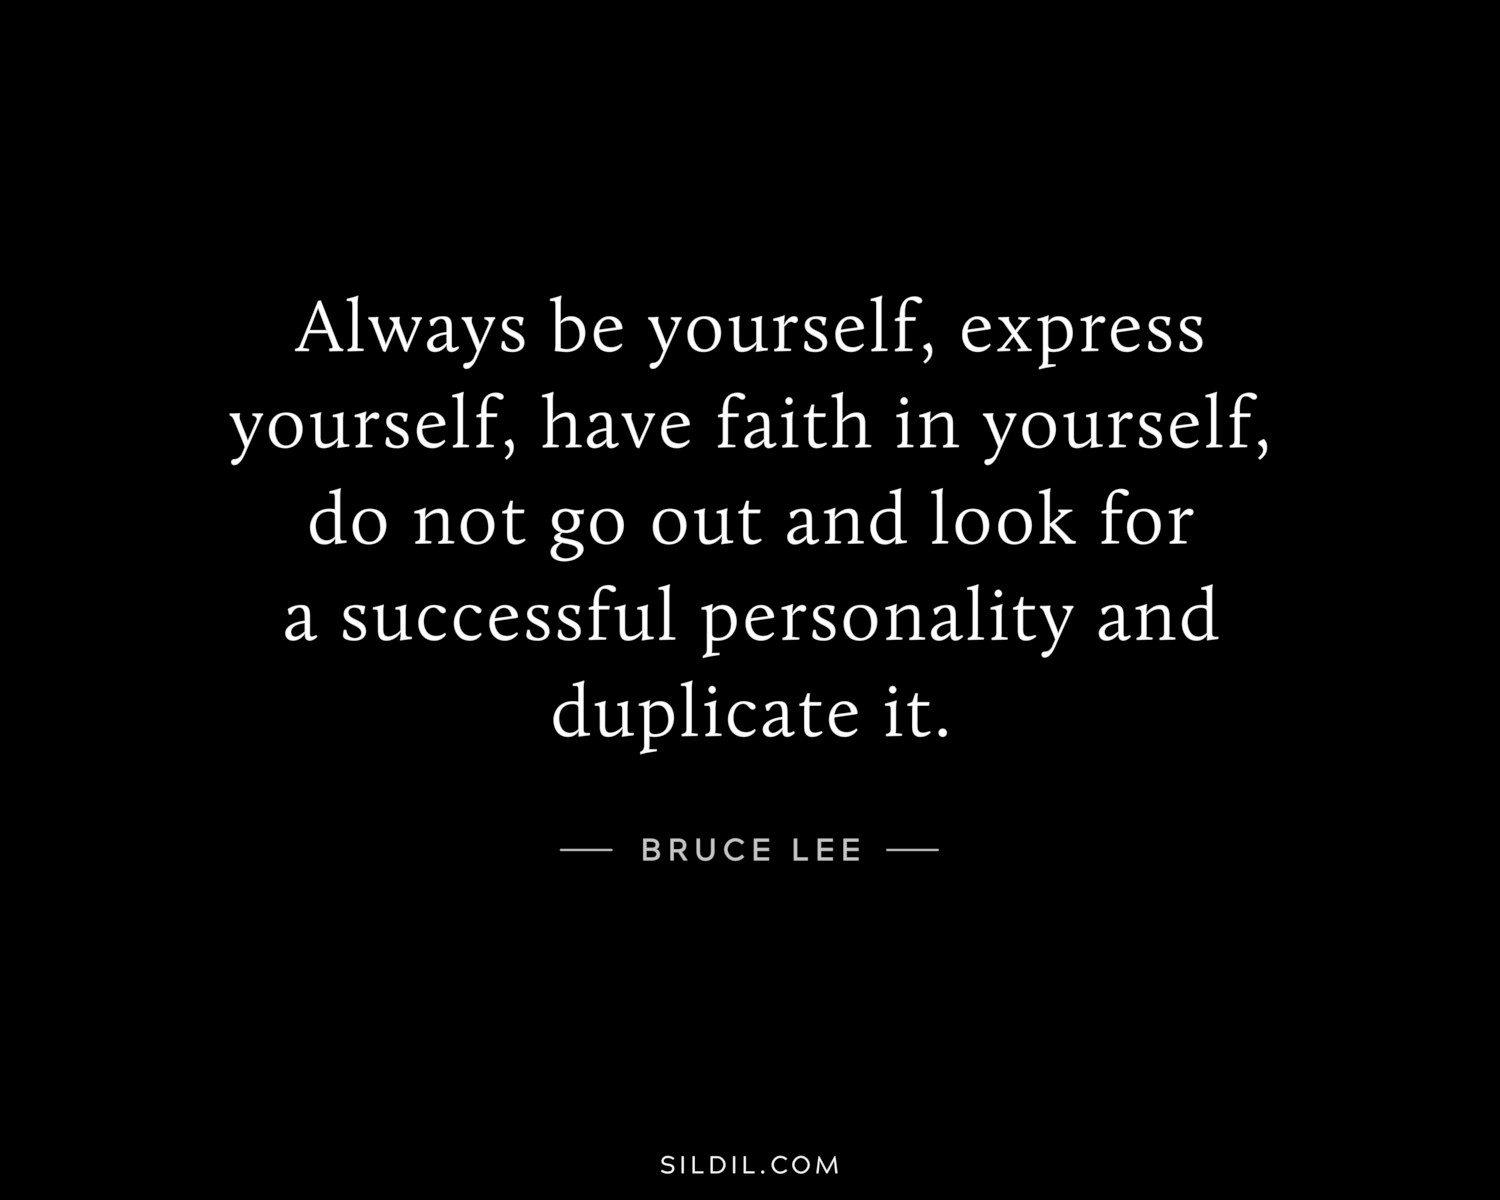 Always be yourself, express yourself, have faith in yourself, do not go out and look for a successful personality and duplicate it.